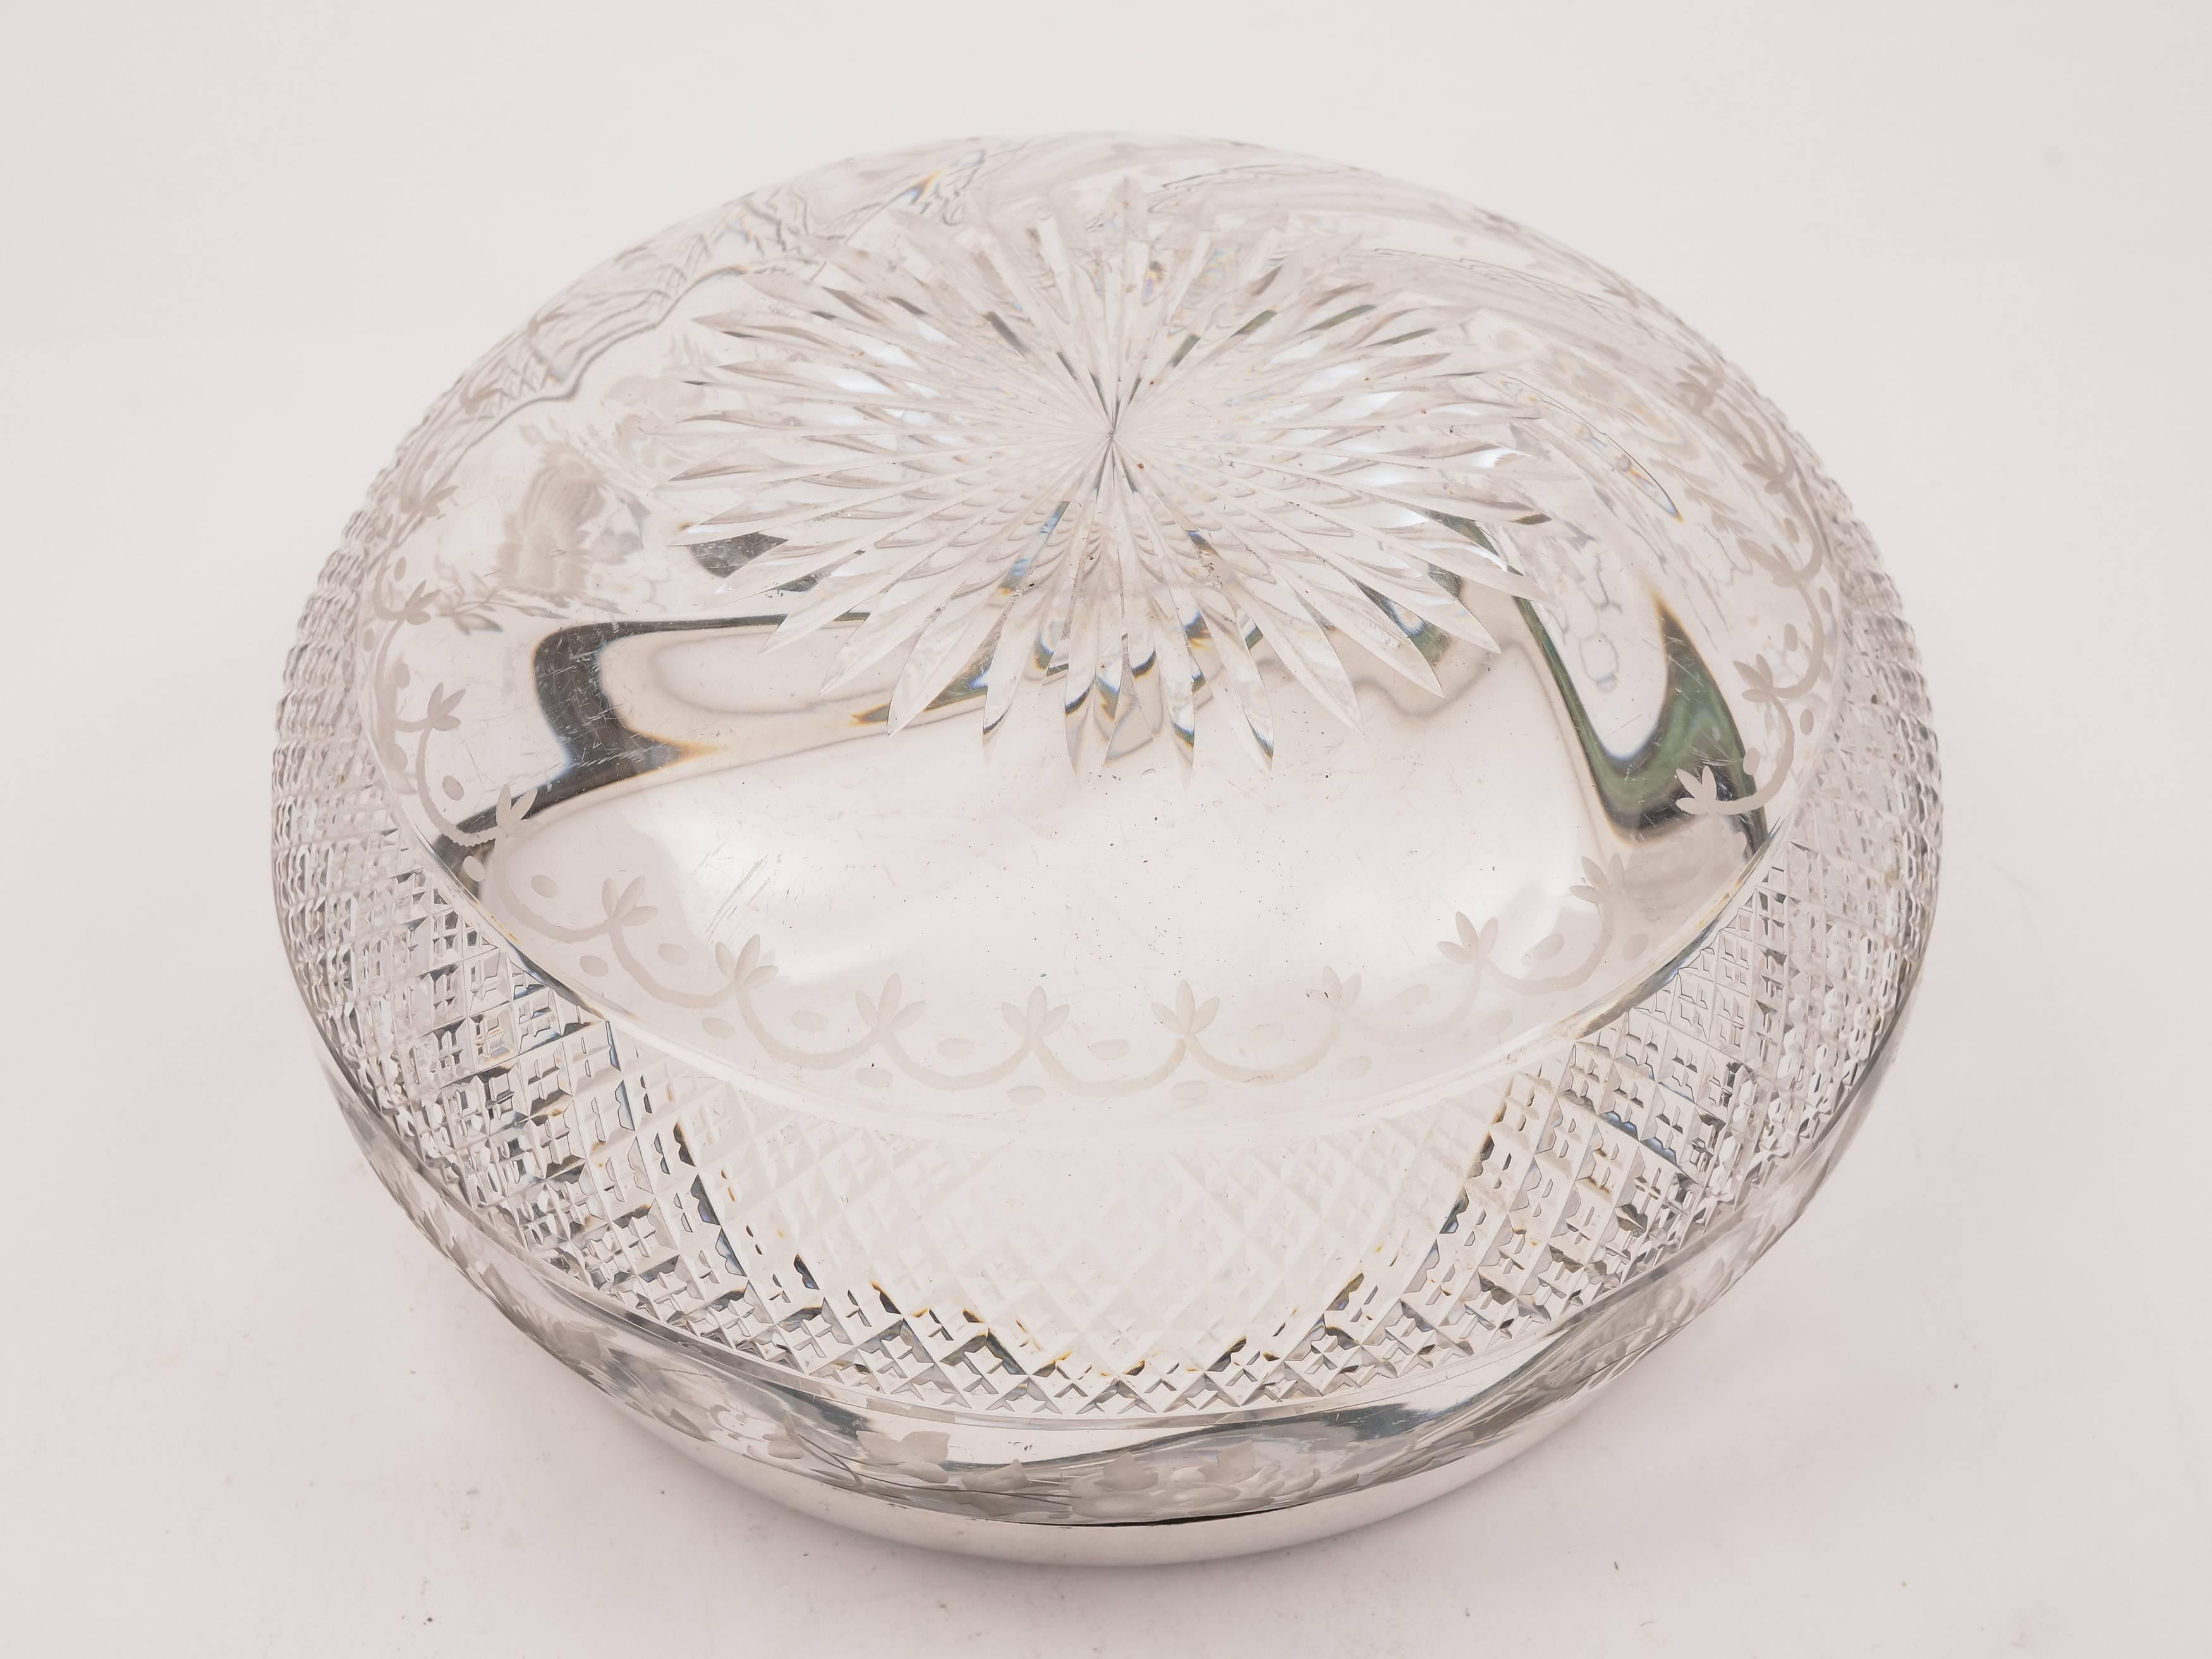 British 20th Century Edwardian Etched Glass and Silver Plated Salad Bowl